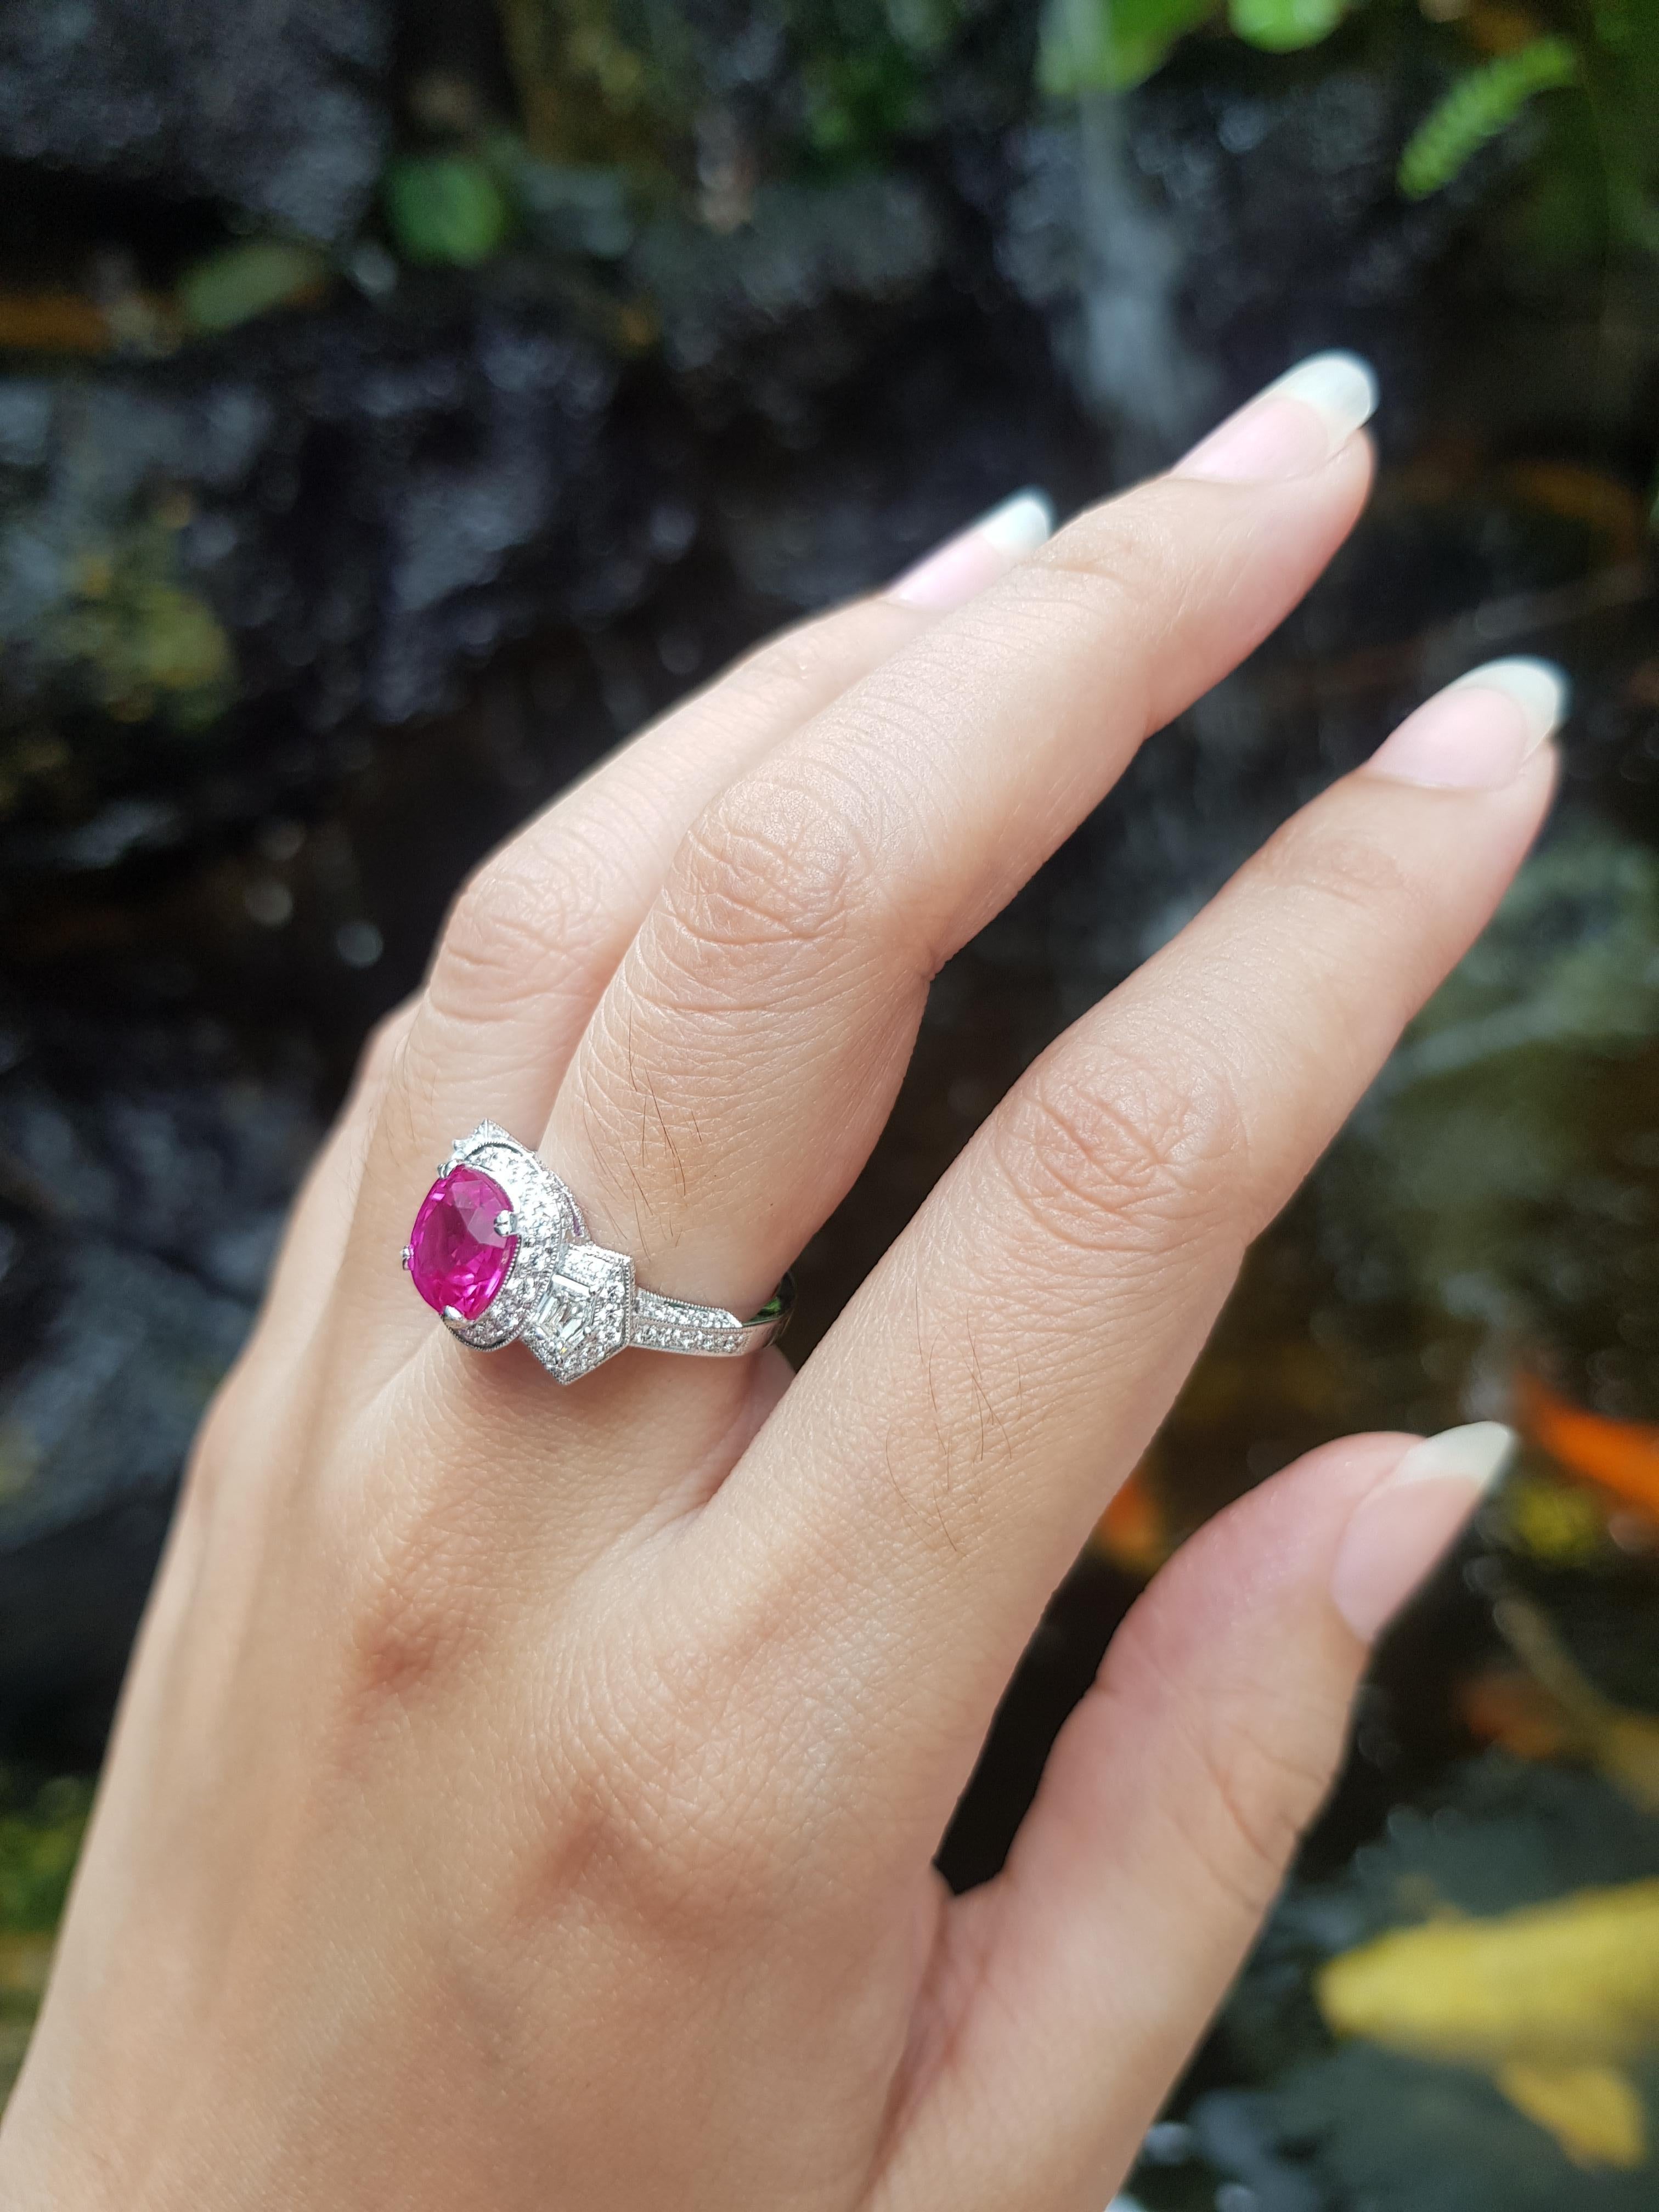 Pink Sapphire 3.01 carats with Diamond 1.22 carats Ring set in 18 Karat White Gold Settings

Width:  1.9 cm 
Length:  1.2 cm
Ring Size: 52
Total Weight: 5.53 grams

Pink Sapphire 
Width:  0.8 cm 
Length:  0.8 cm

